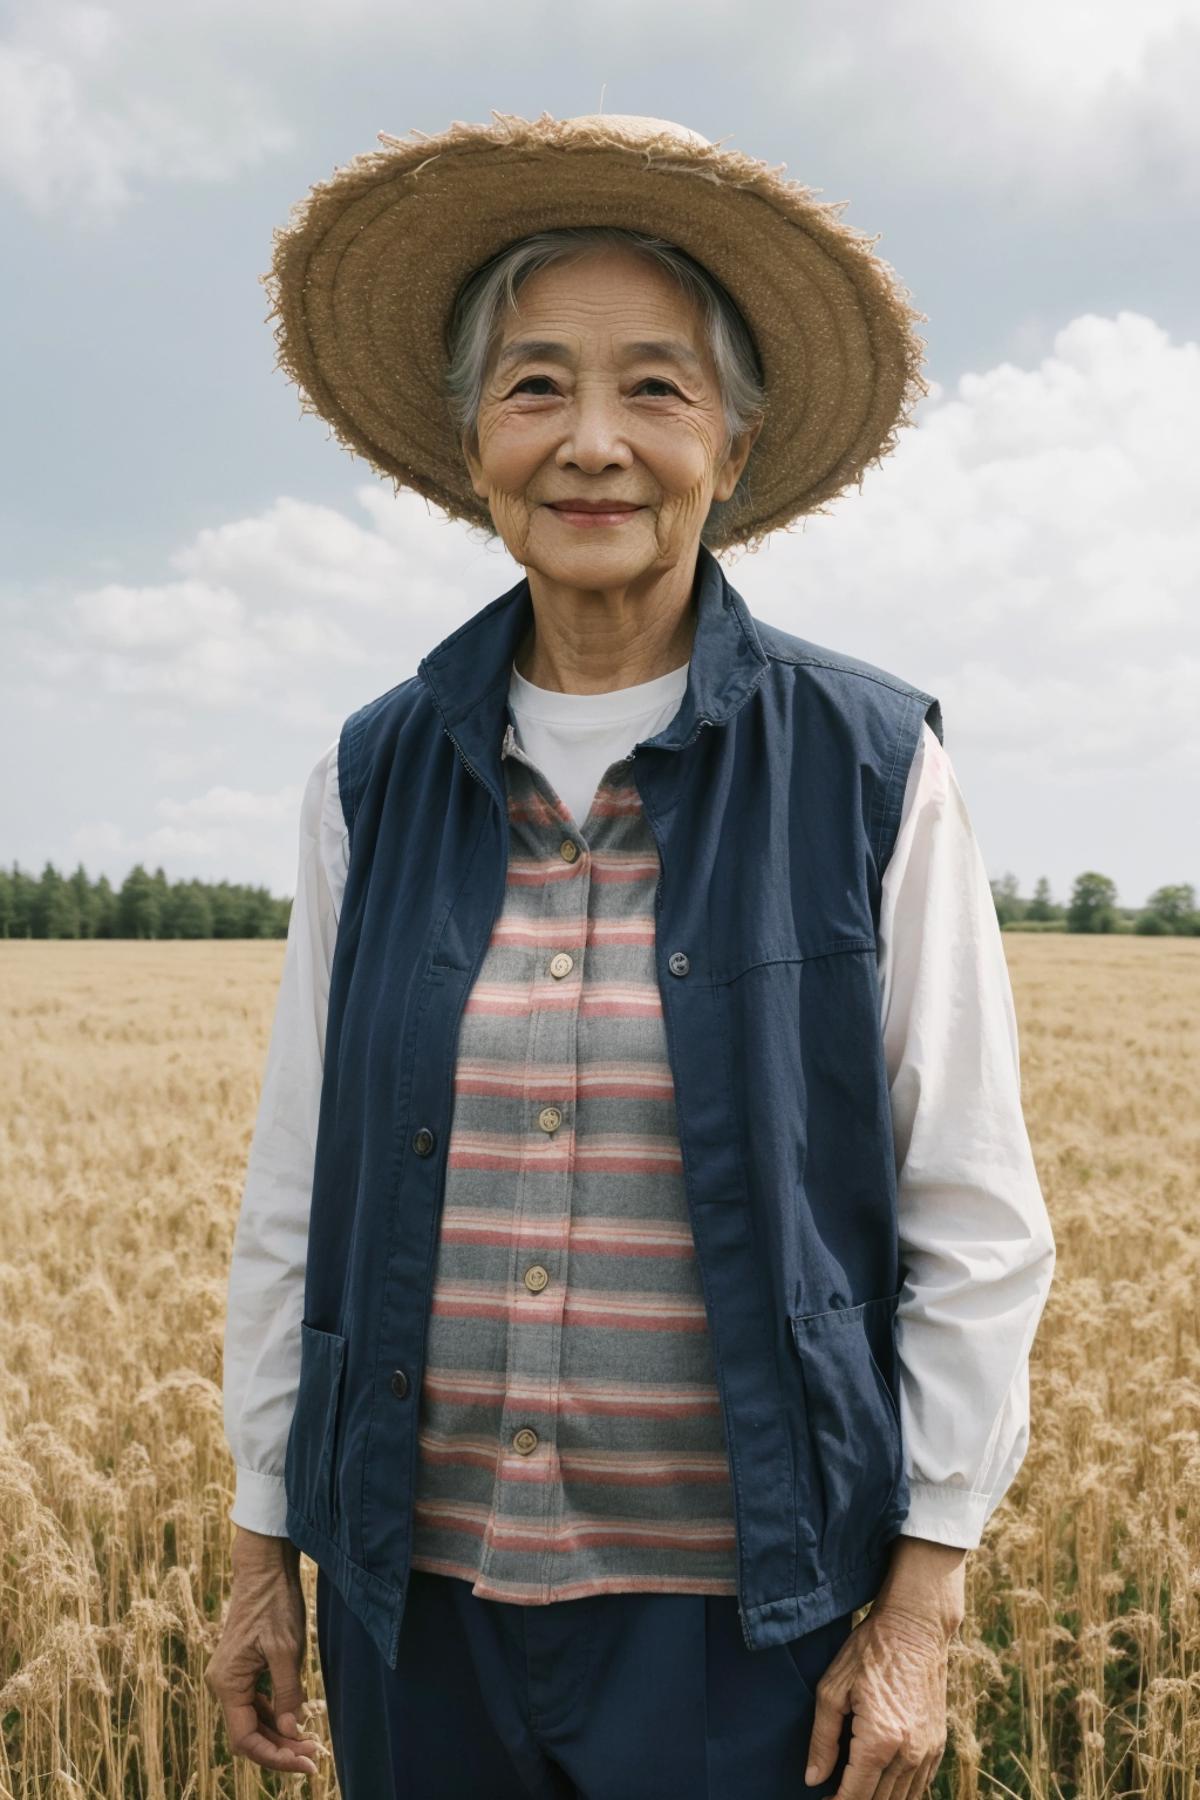 An older woman wearing a blue vest and hat standing in a wheat field.